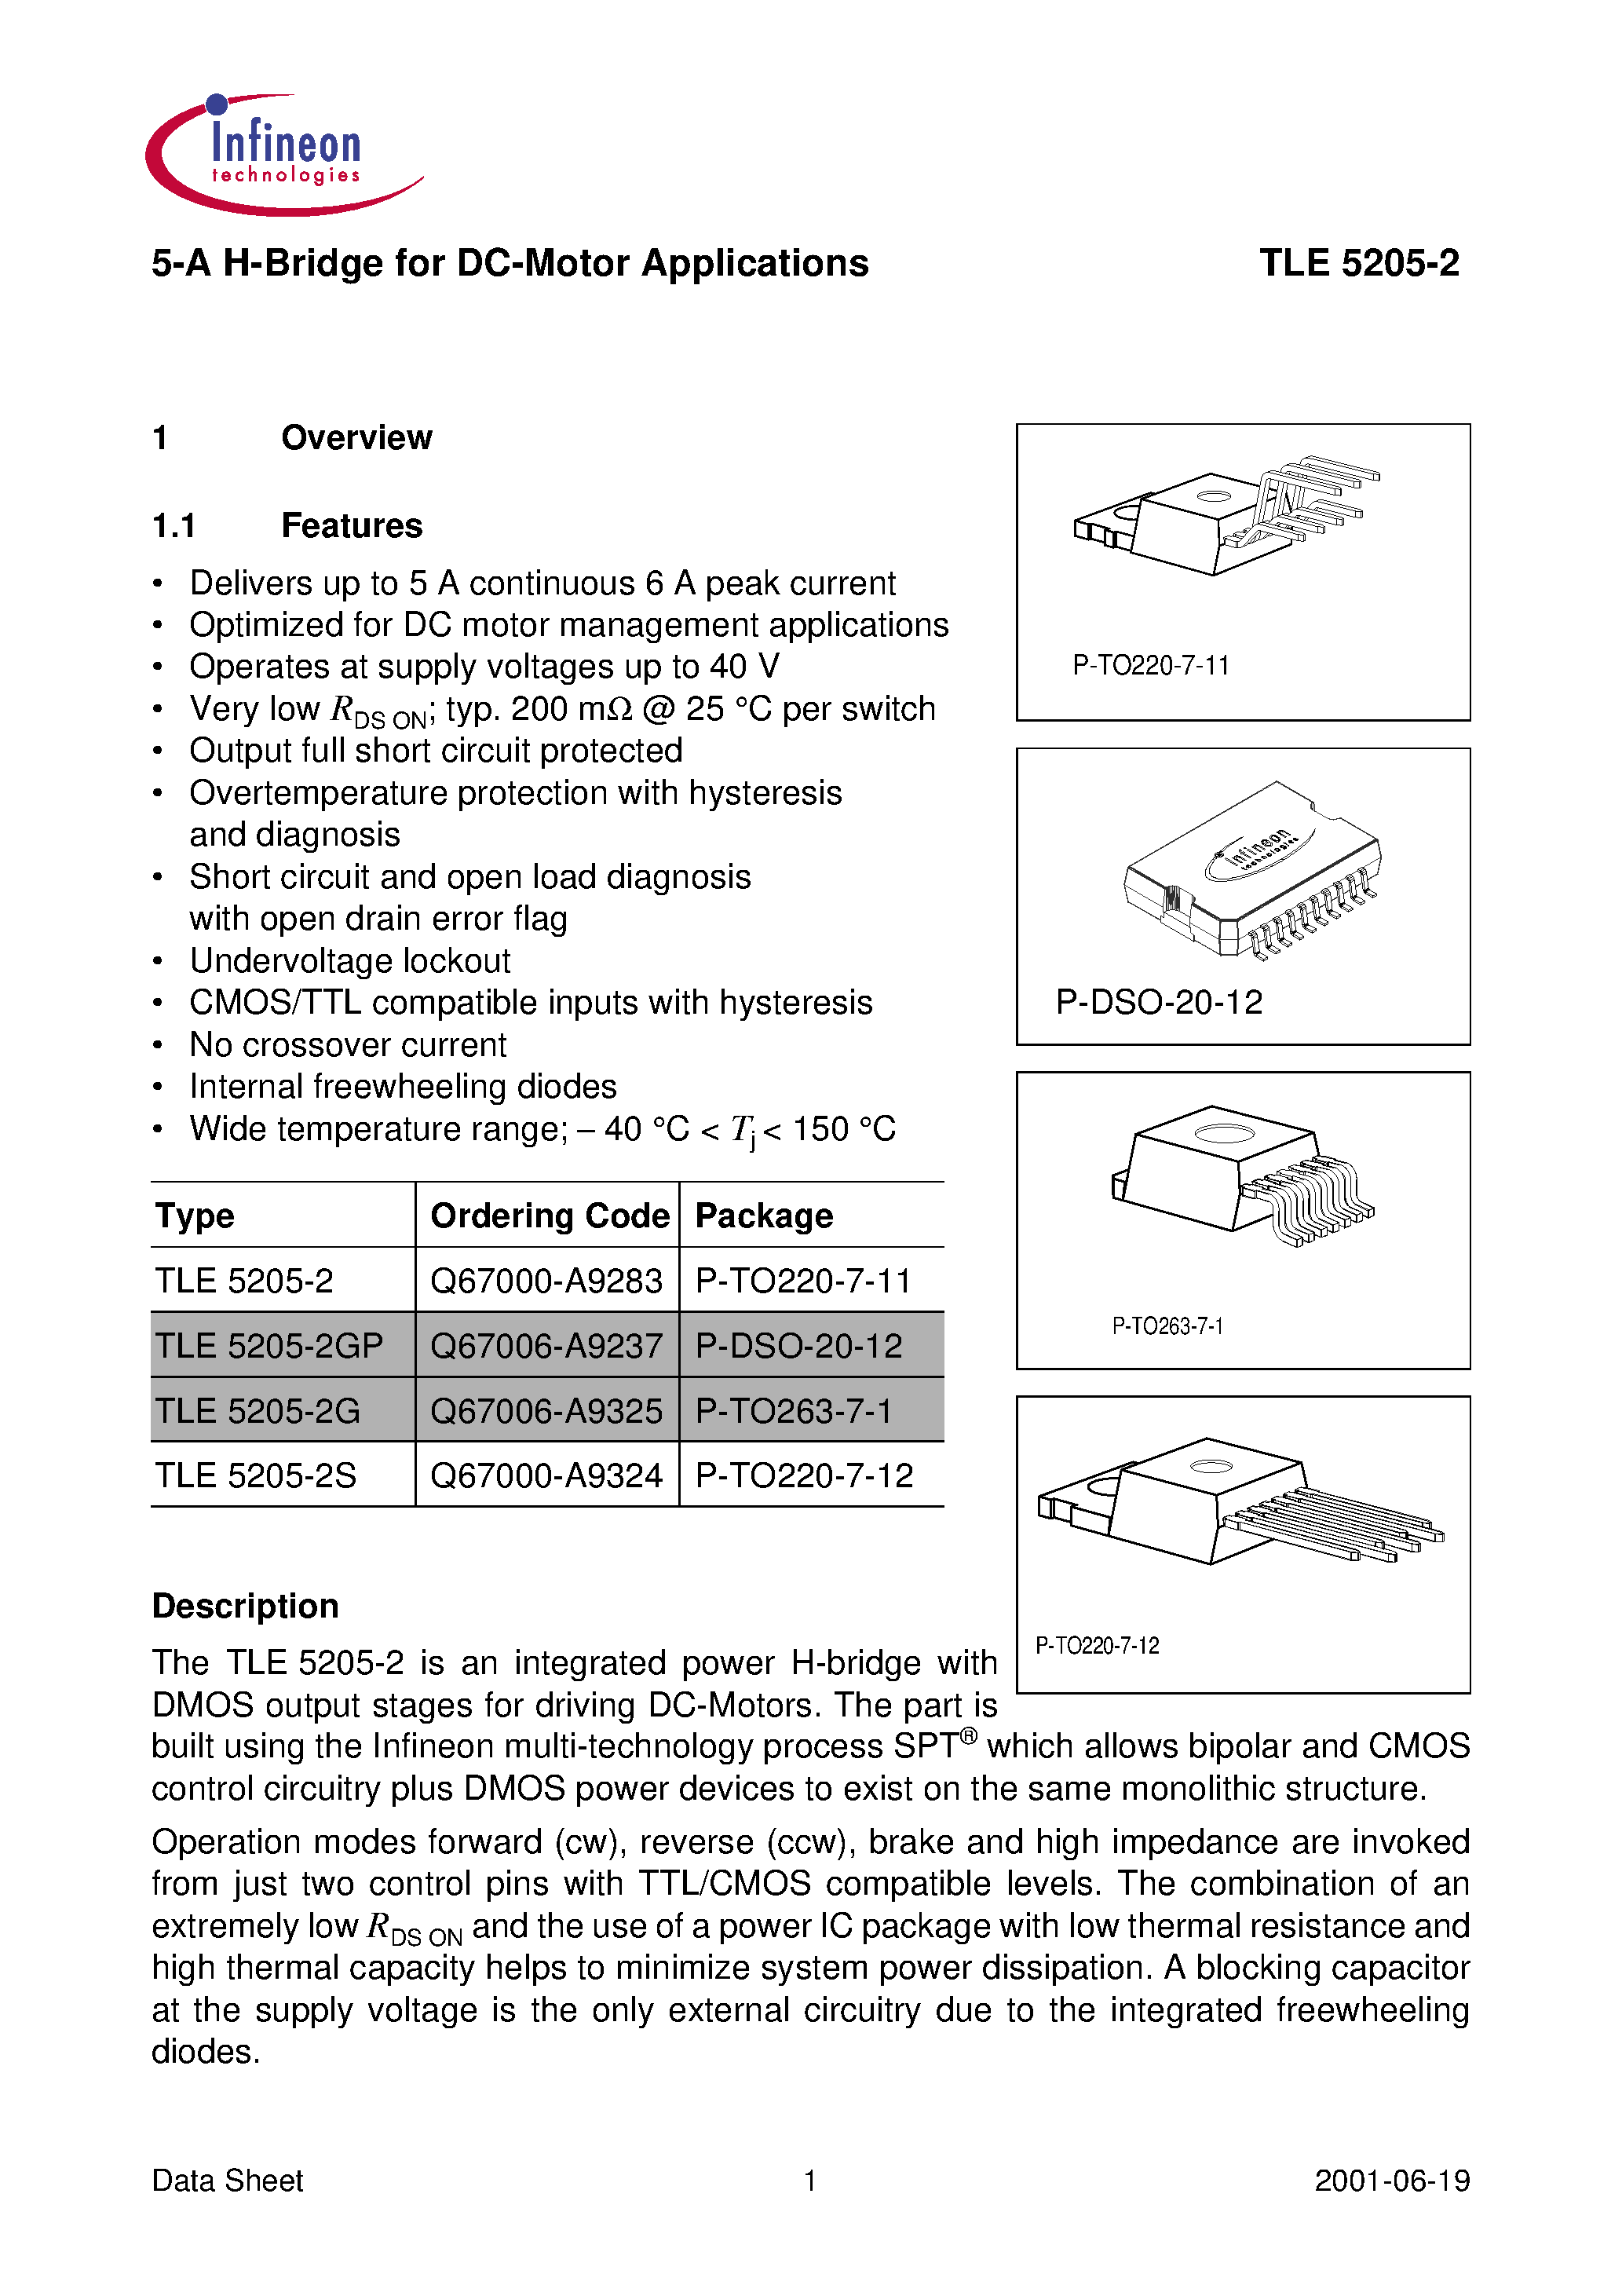 Datasheet TLE5205-2GP - 5-A H-Bridge for DC-Motor Applications page 1